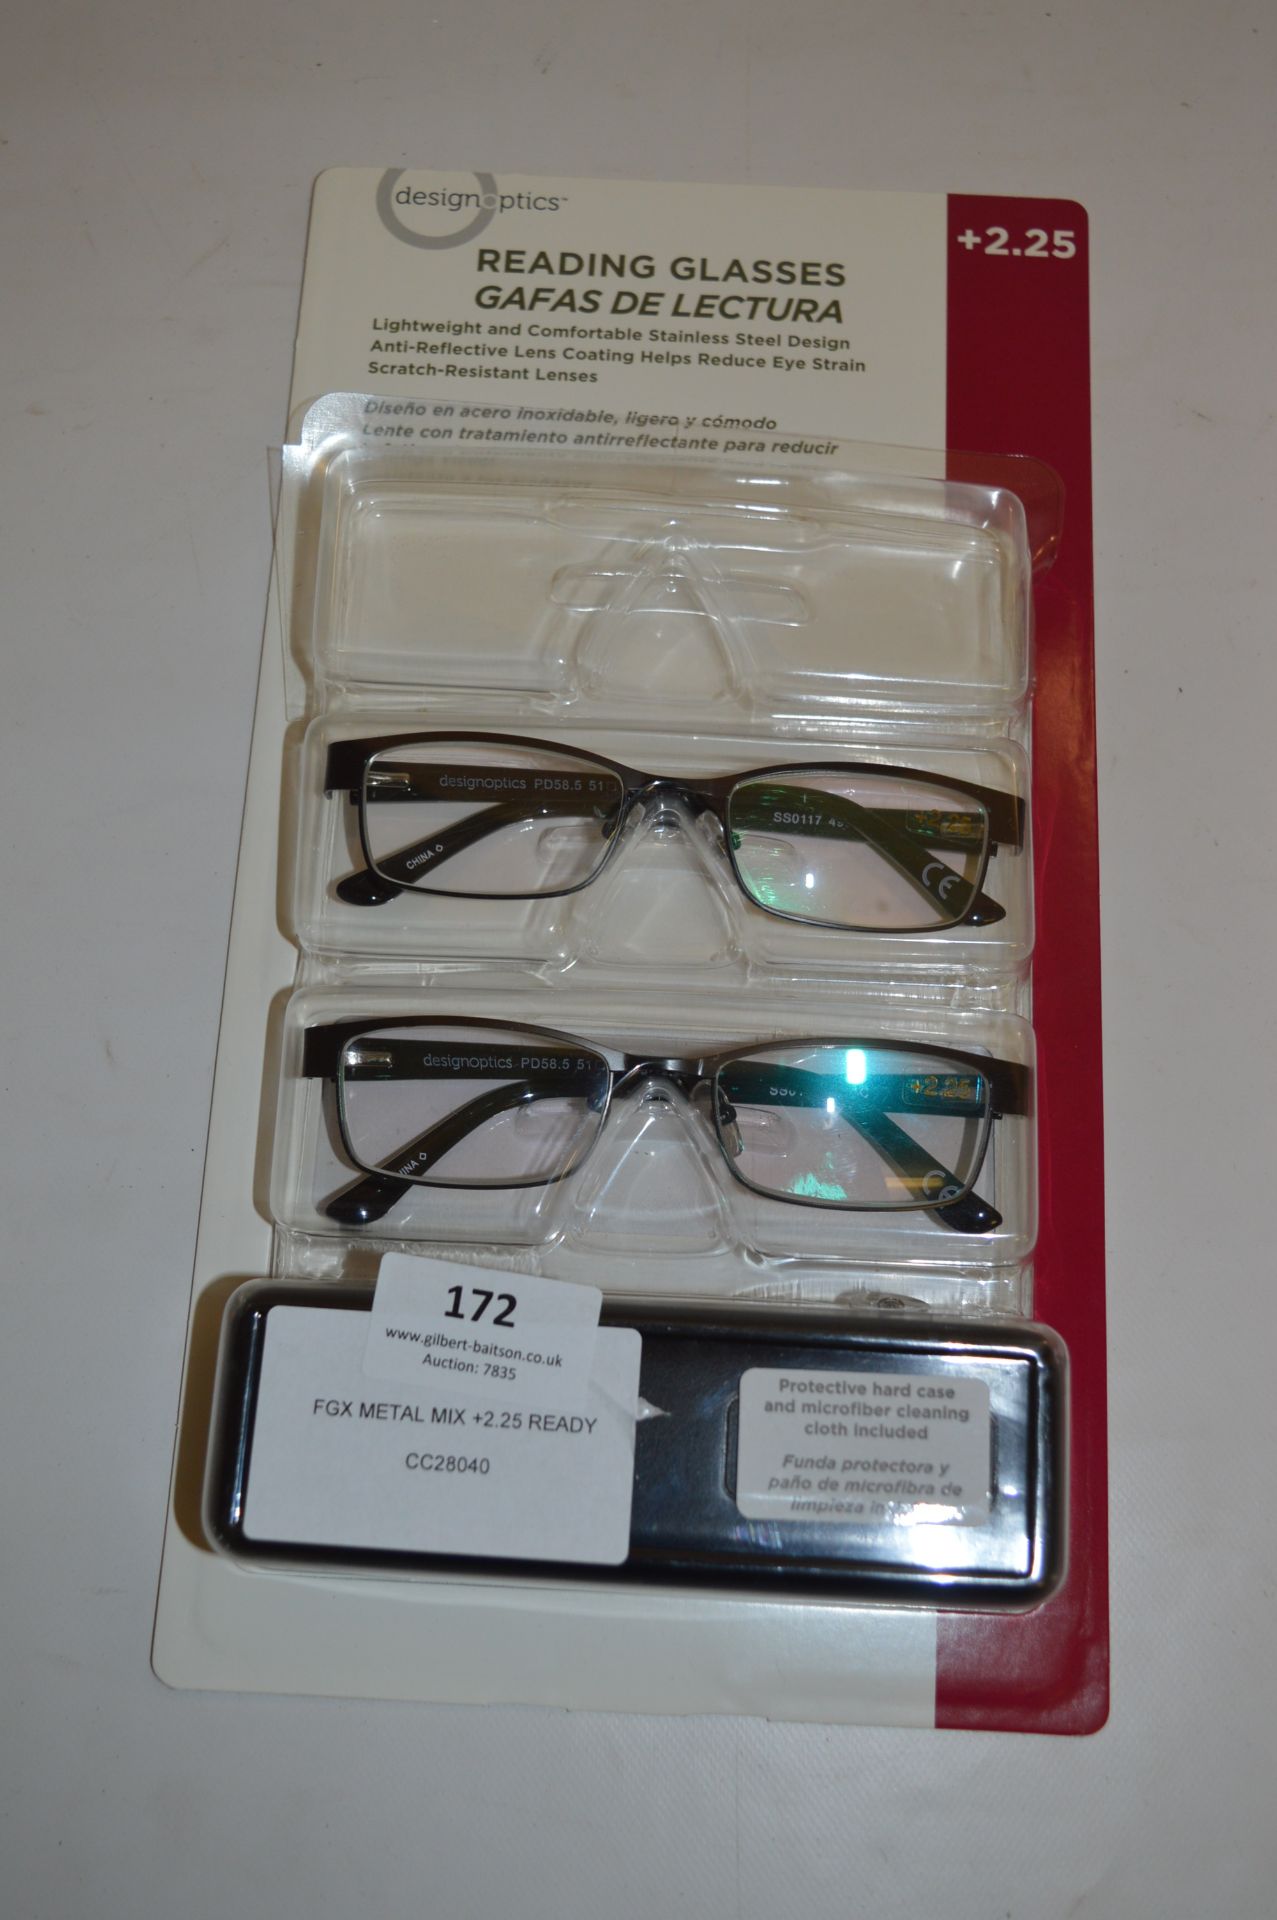 *FGX METAL MIX +2.25 READY READER GLASSES